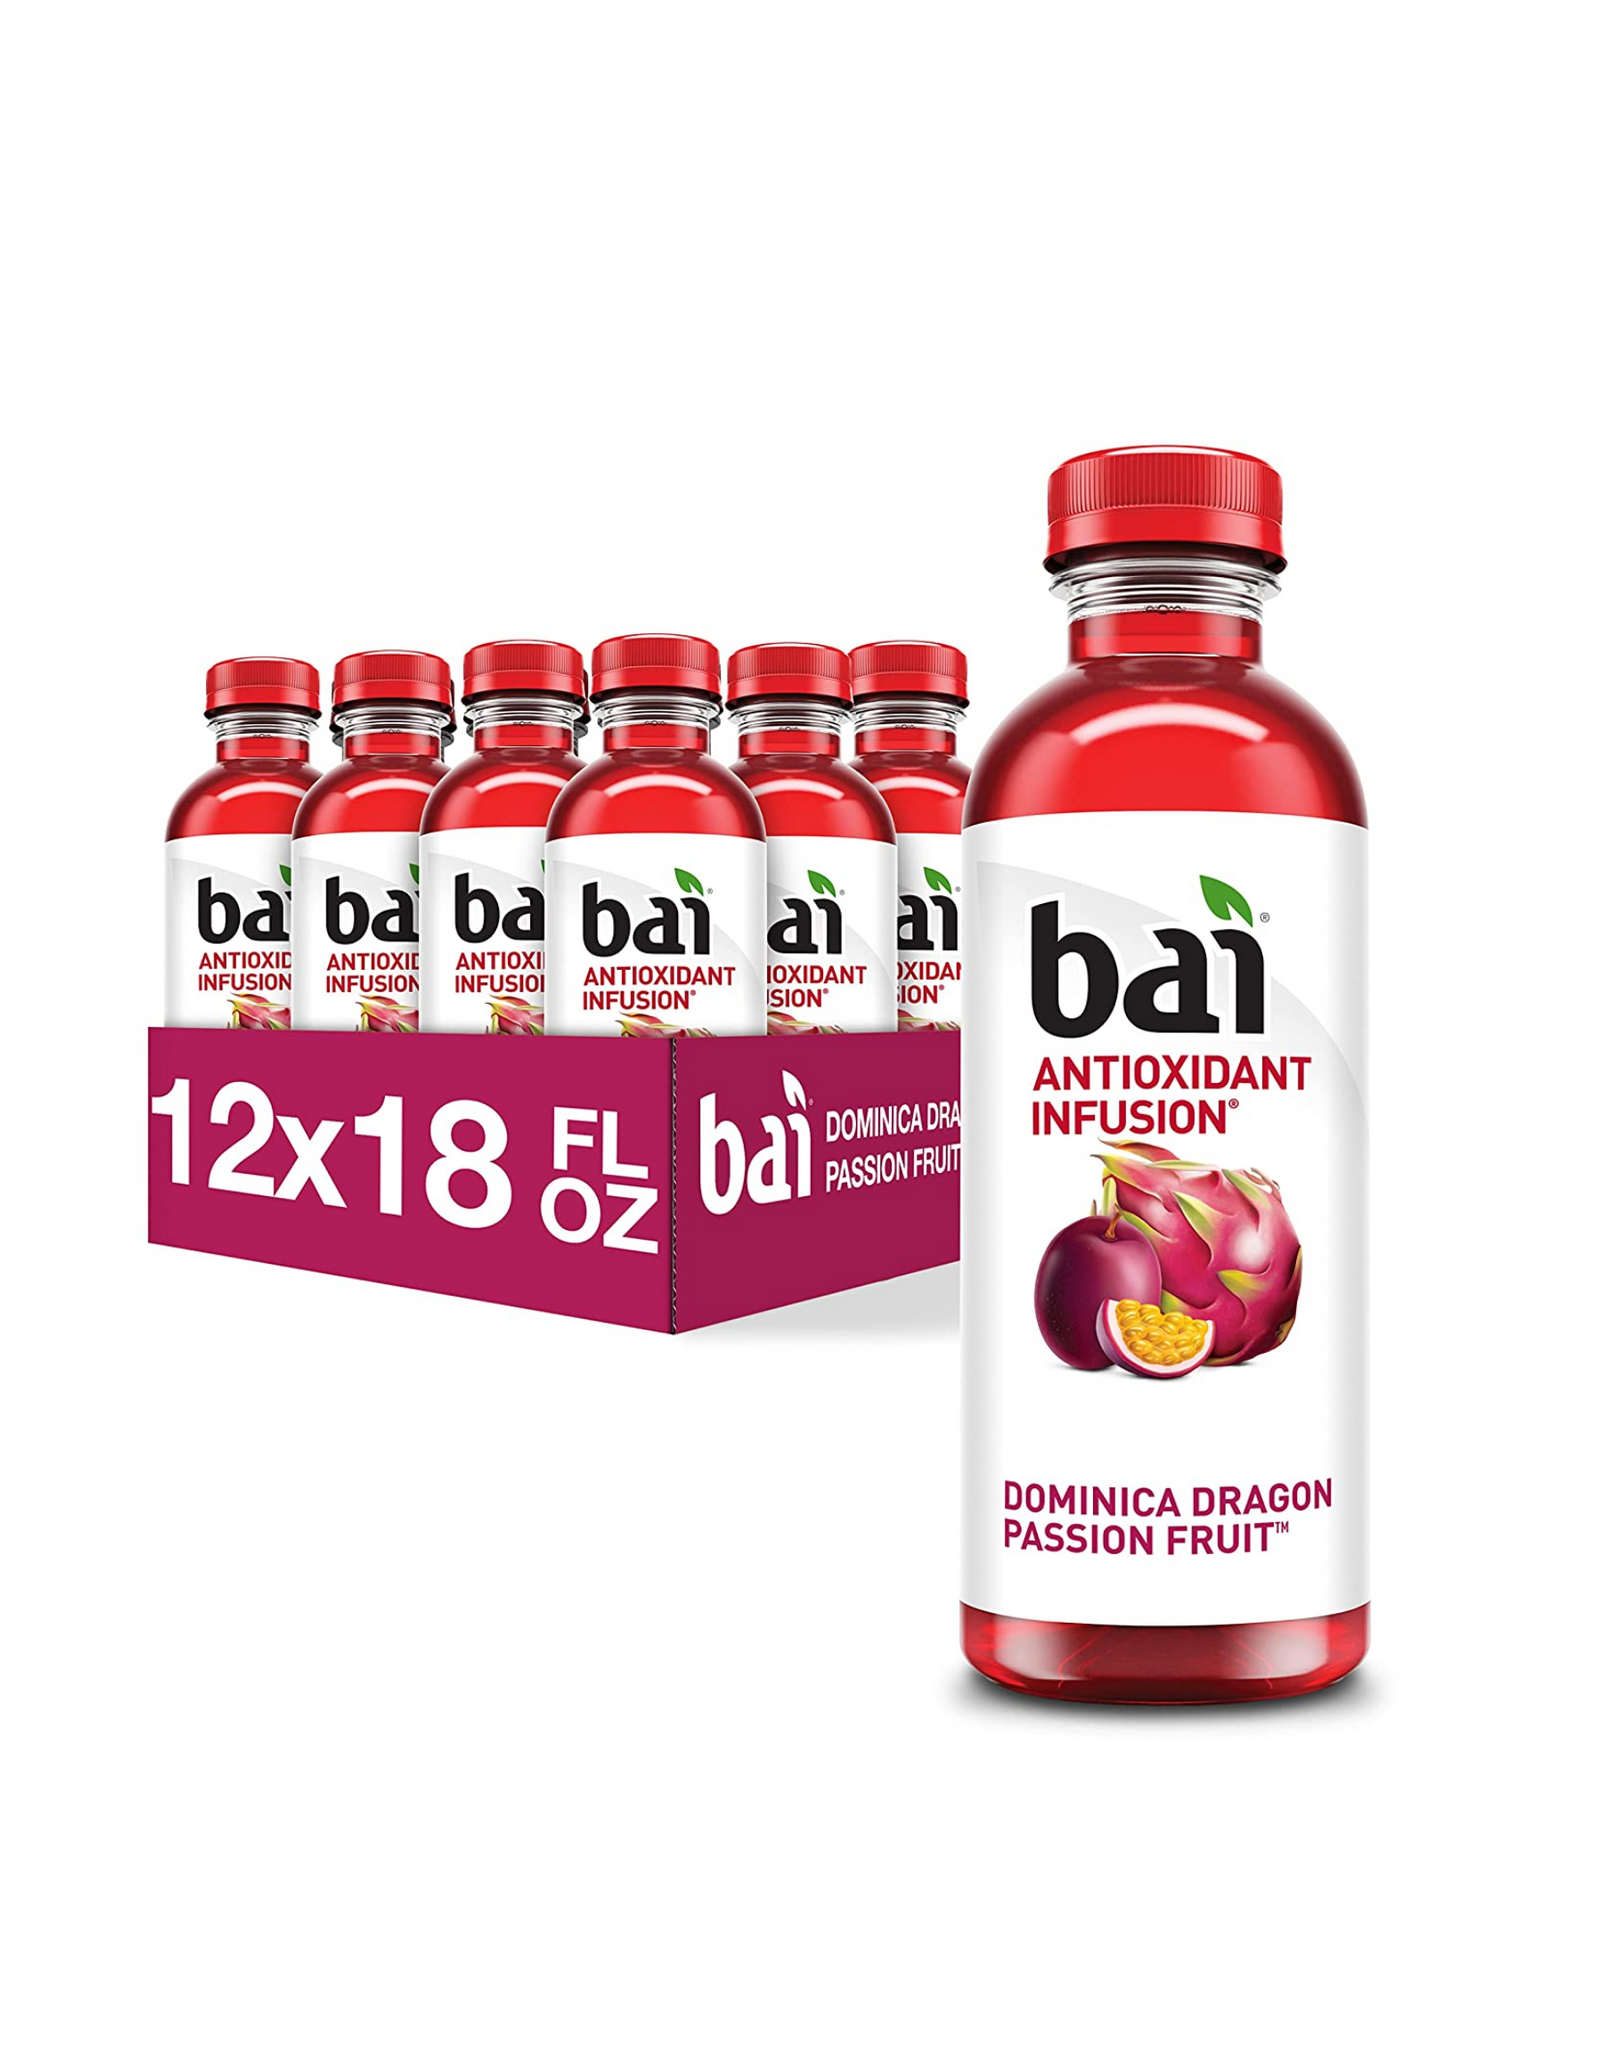 Bai Dominica Dragon Passionfruit, Antioxidant Infusion, 18 fl oz (Pack of 12)